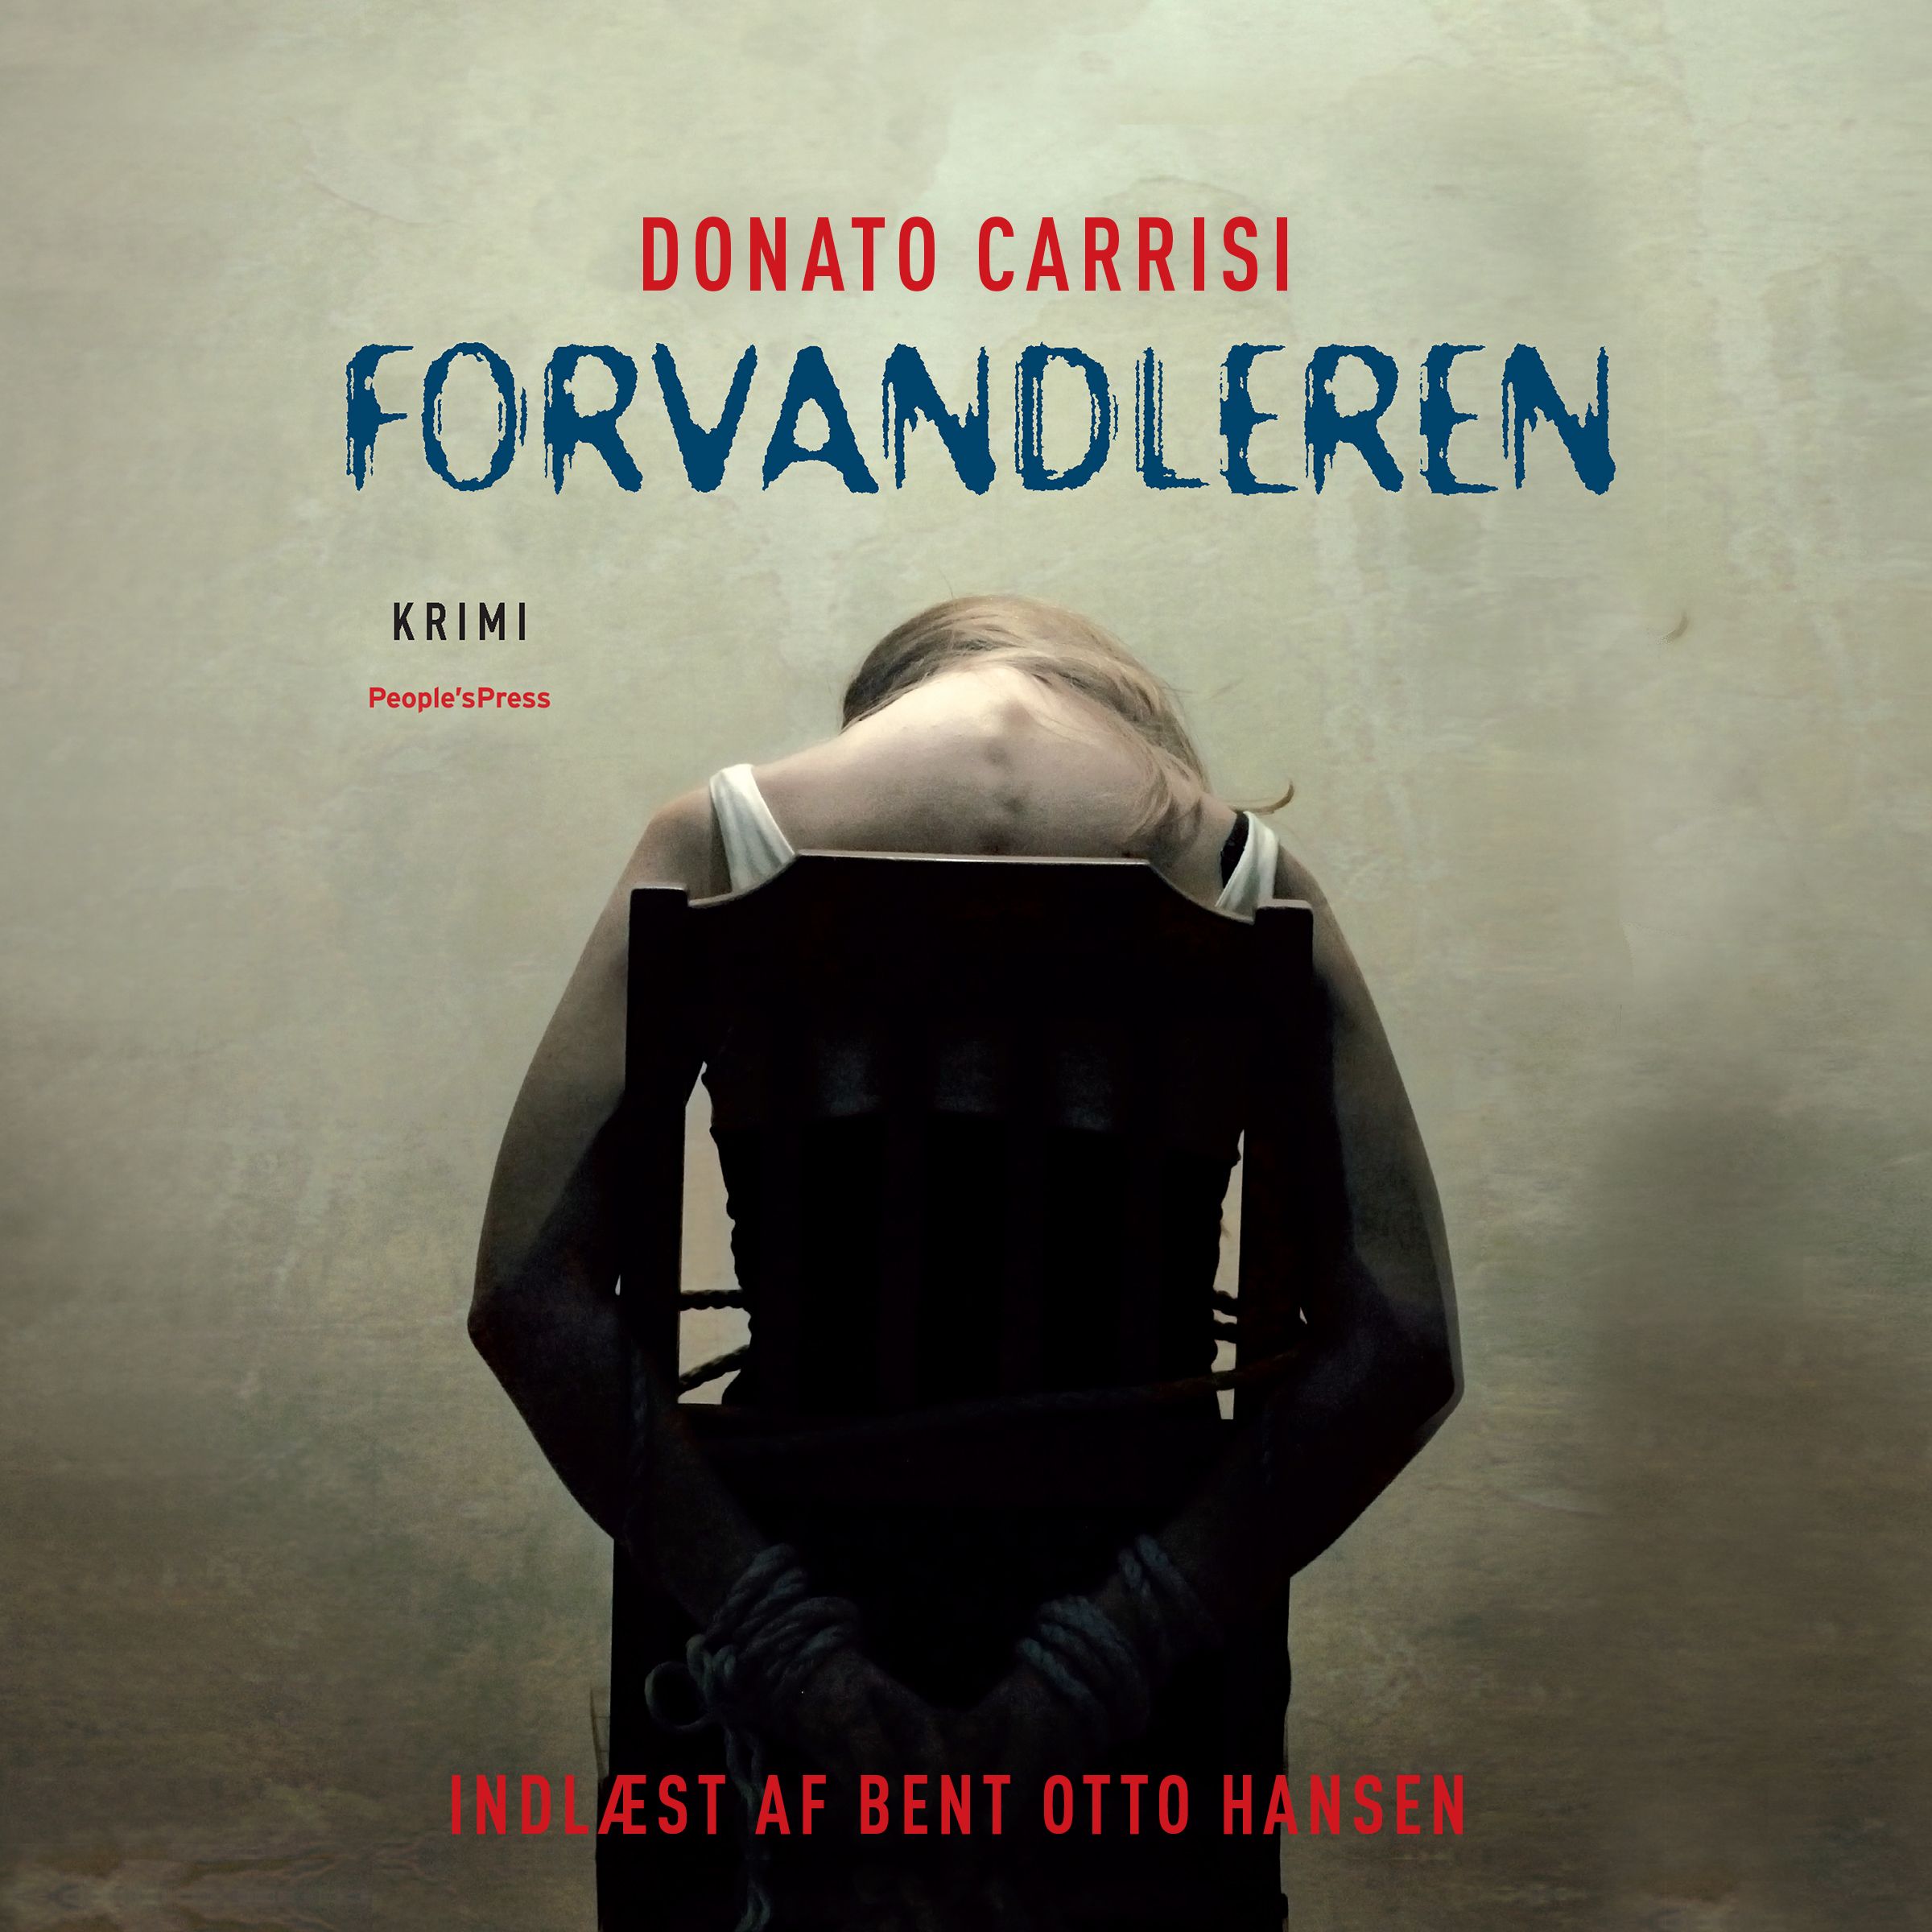 Forvandleren, audiobook by Donato Carrisi